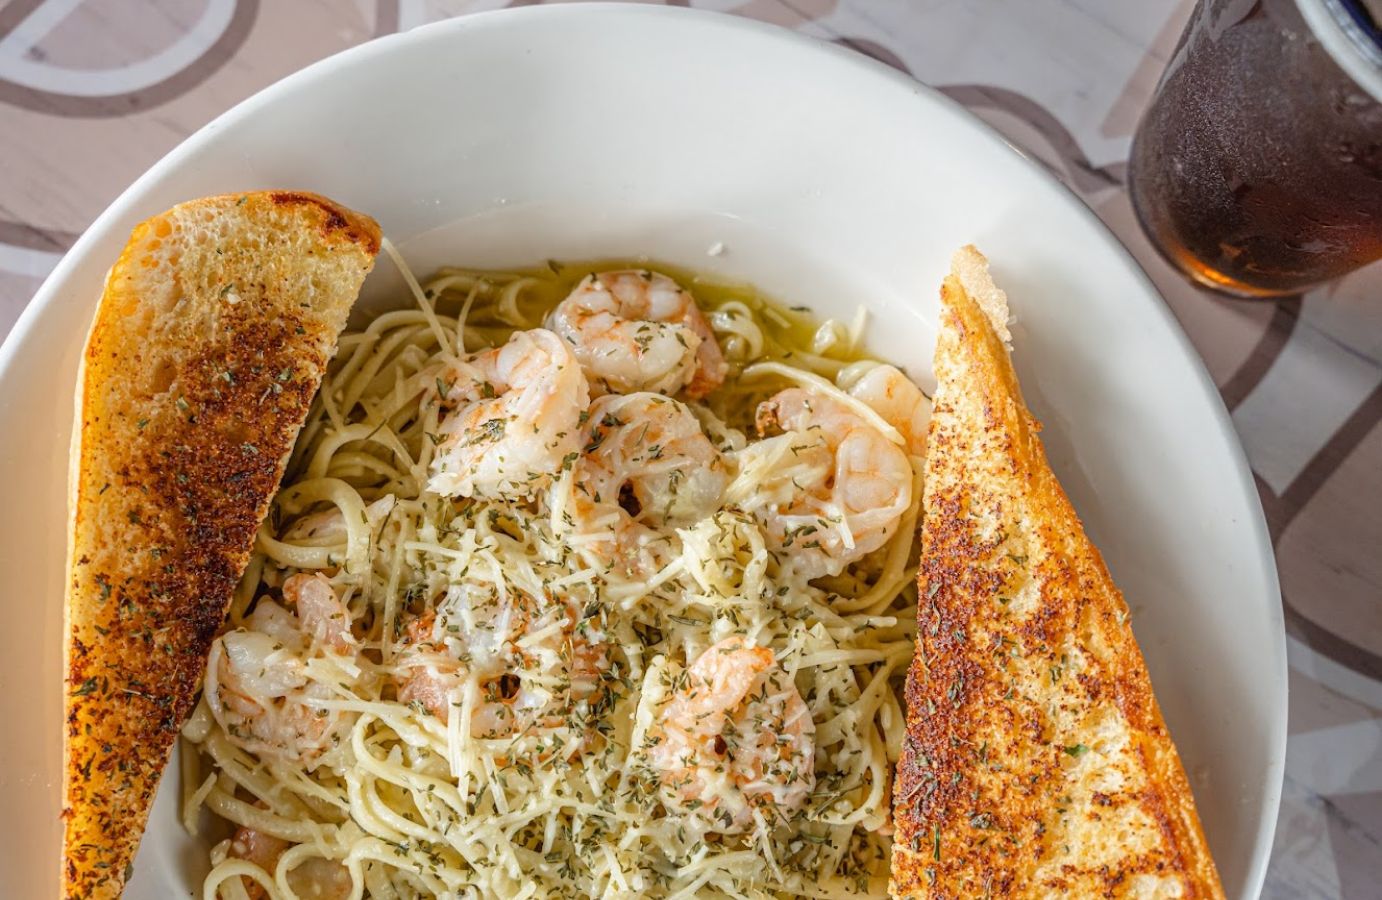 Closeup of a plate with Shrimp Scampi pasta and some toast on the side